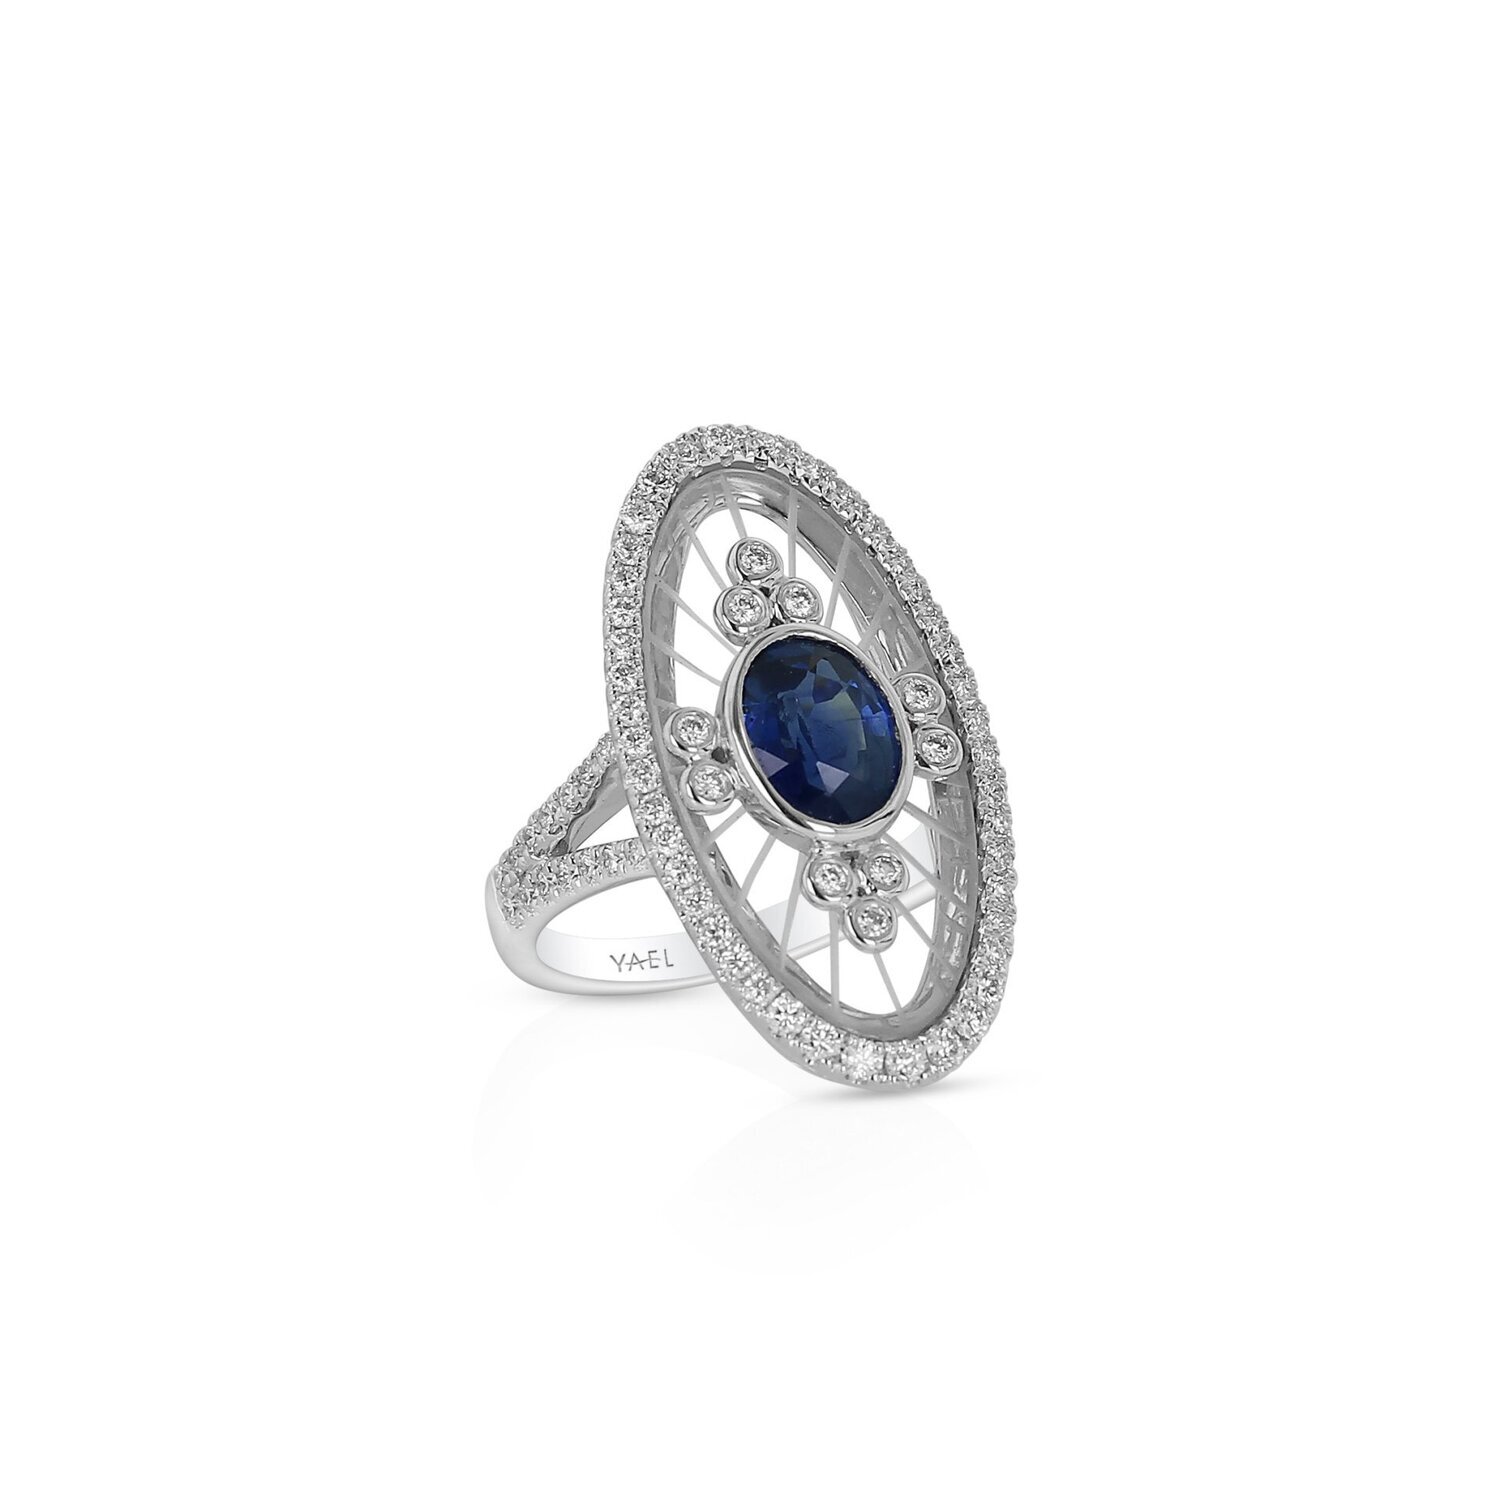 18kt White Gold - Oval Blue Sapphire: 1.64ct - Crystal: 3.45ct - White Round Diamond: 0.90ct